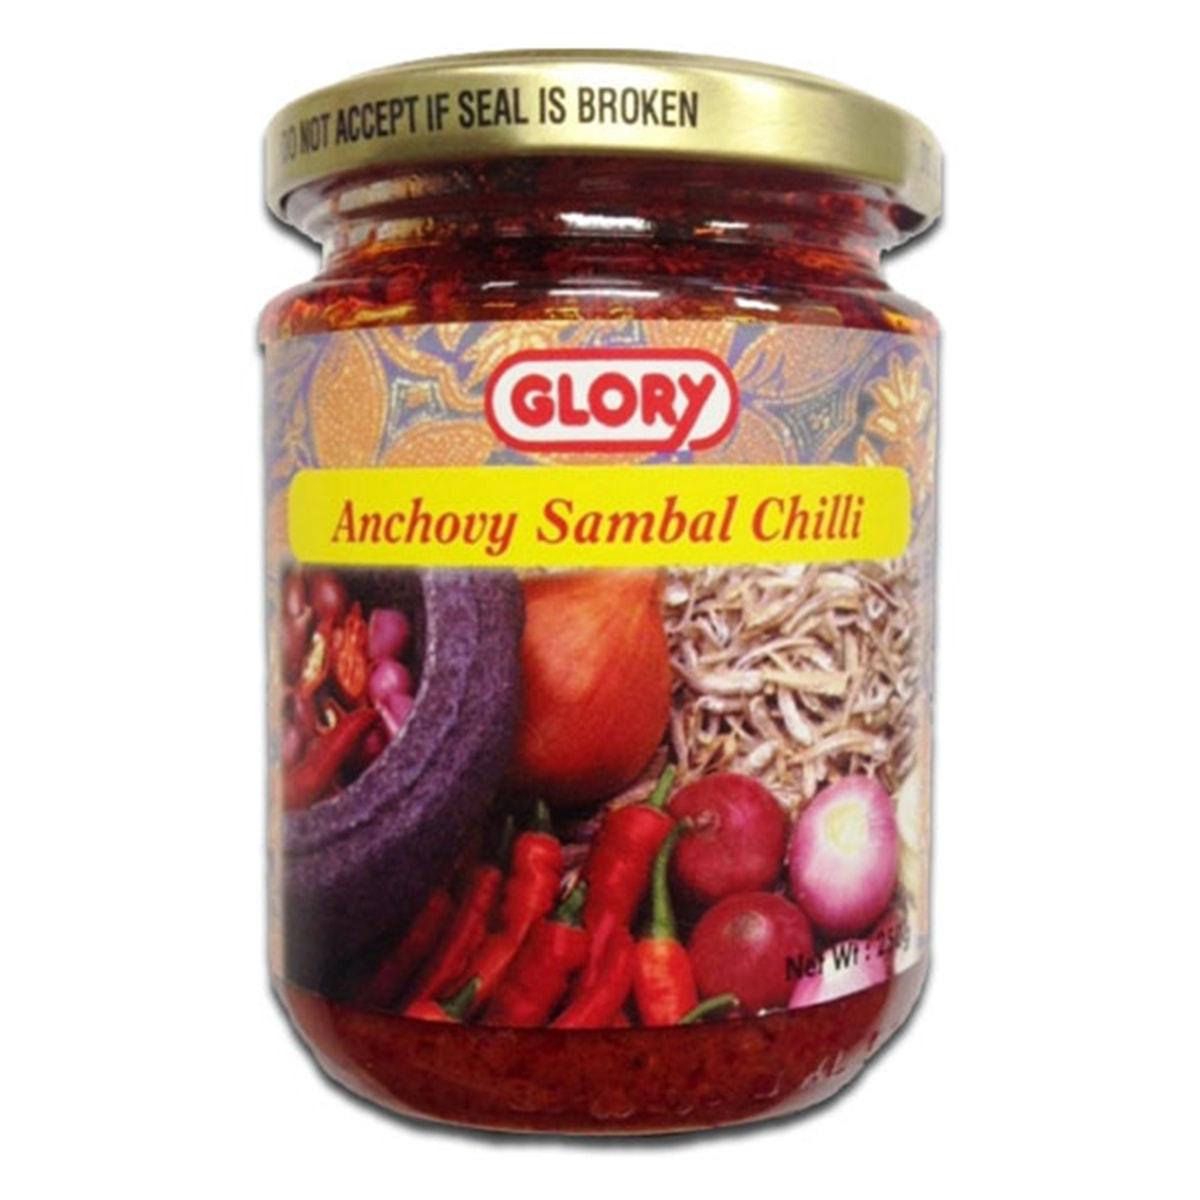 GLORY SAMBAL CHILI WITH ANCHOVY 250 G - Premium Co  Groceries 